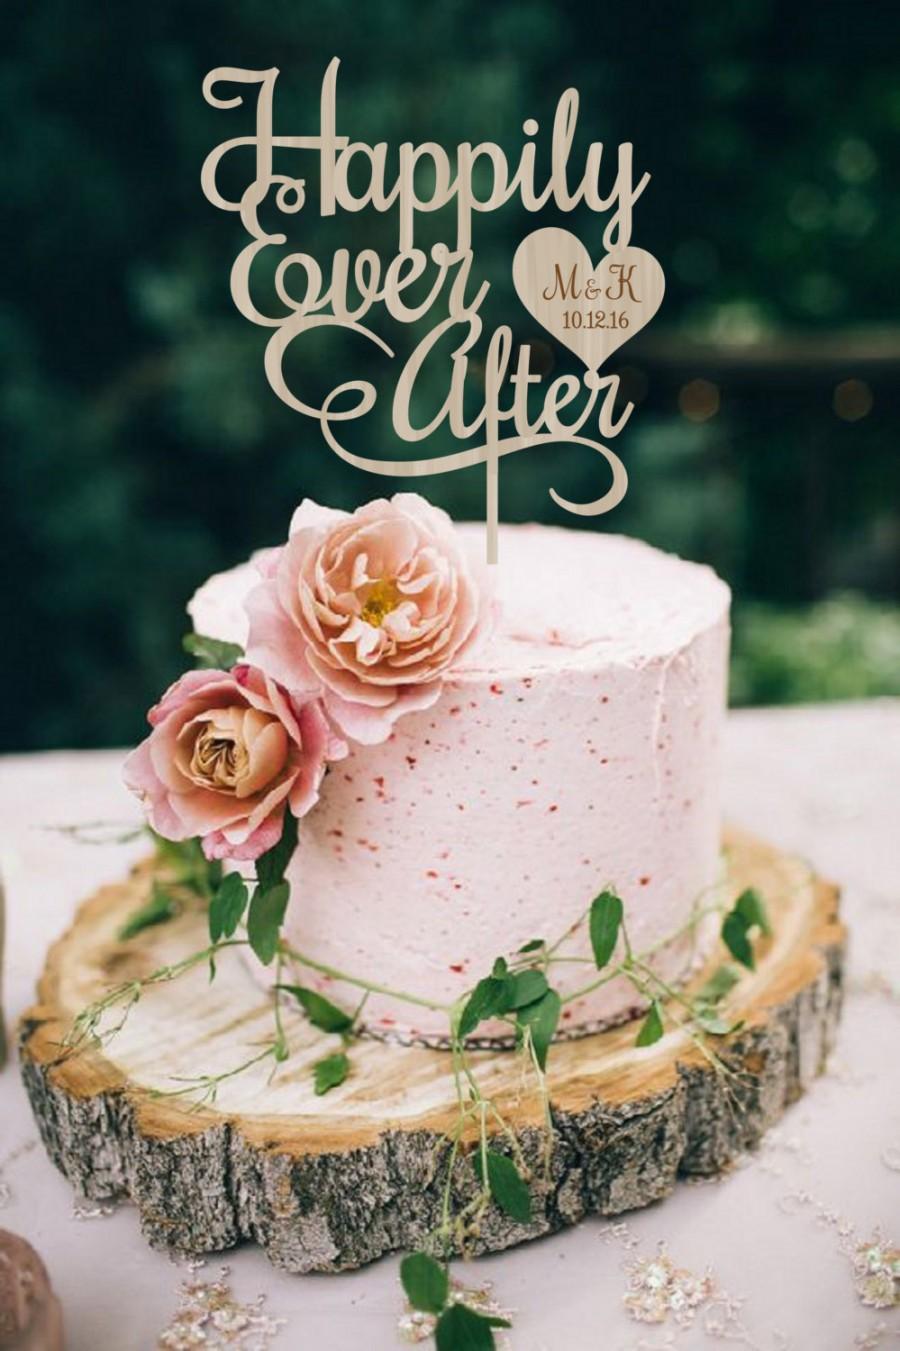 Mariage - Happily Ever After  Wedding Cake Topper Rustic Cake Topper  Personalized  Wood Cake Topper Silver Gold Cake Topper